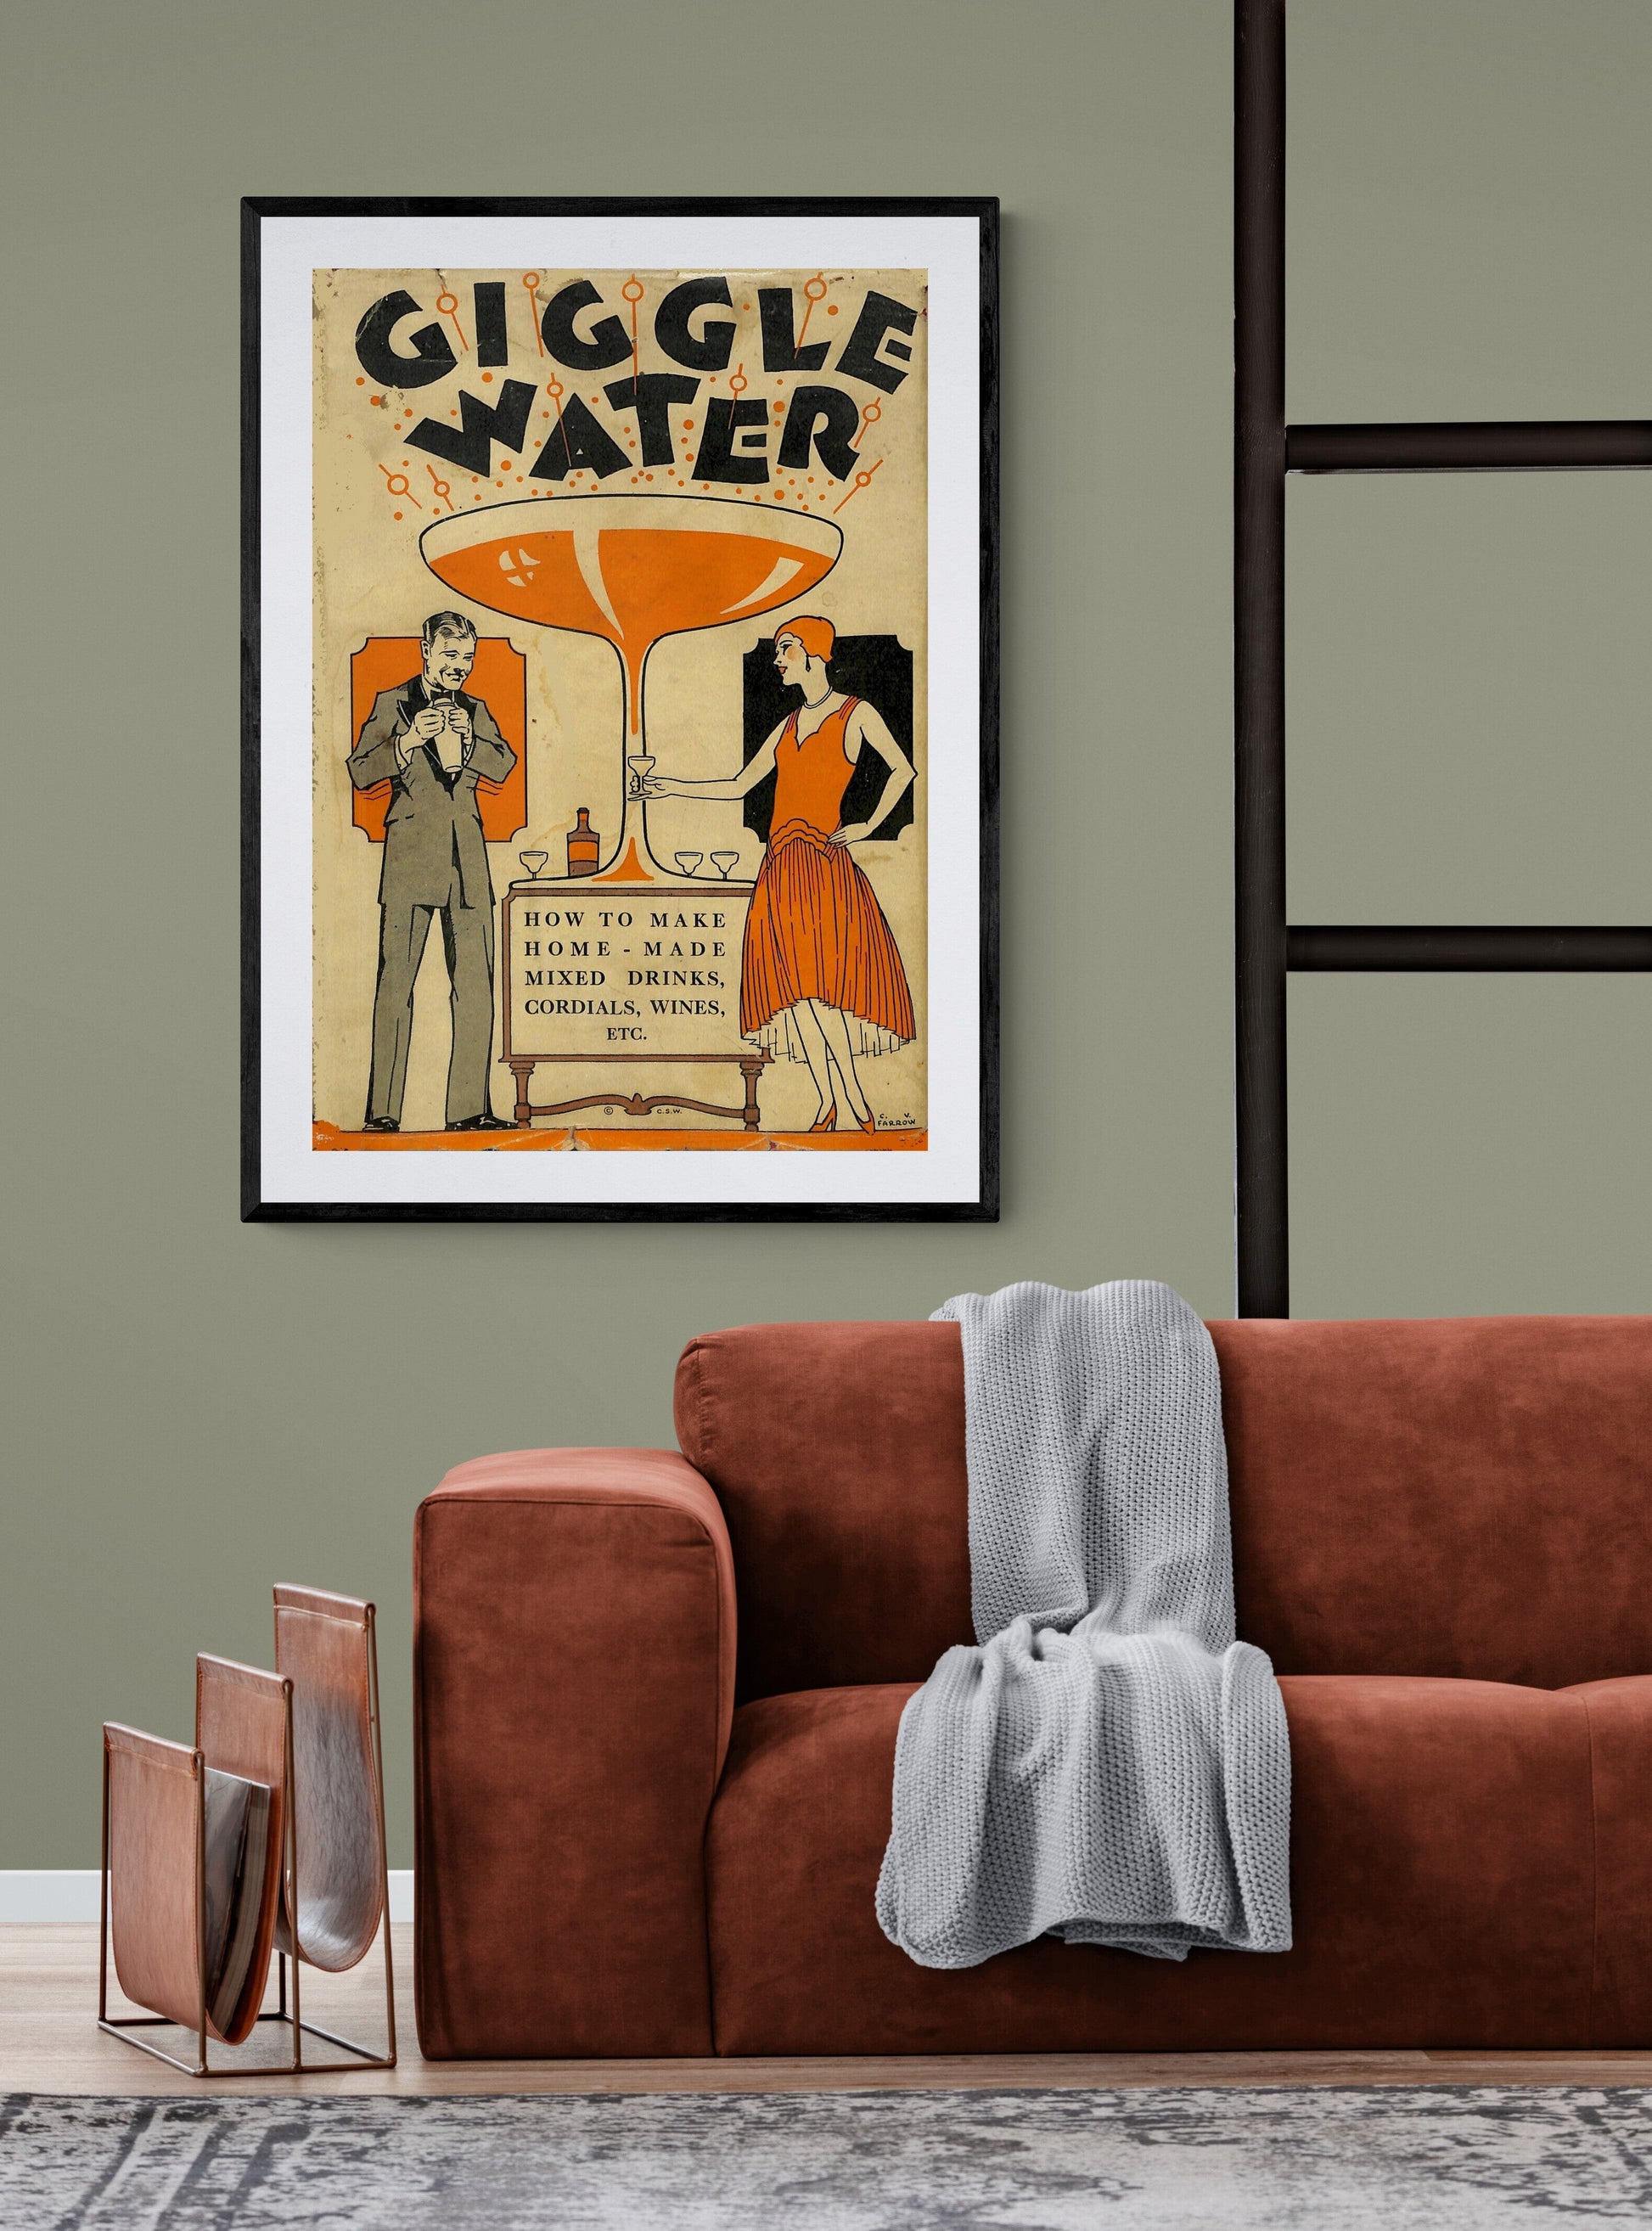 Giggle Water Cocktail Book Cover 1920s | Vintage cocktail posters Posters, Prints, & Visual Artwork The Trumpet Shop   